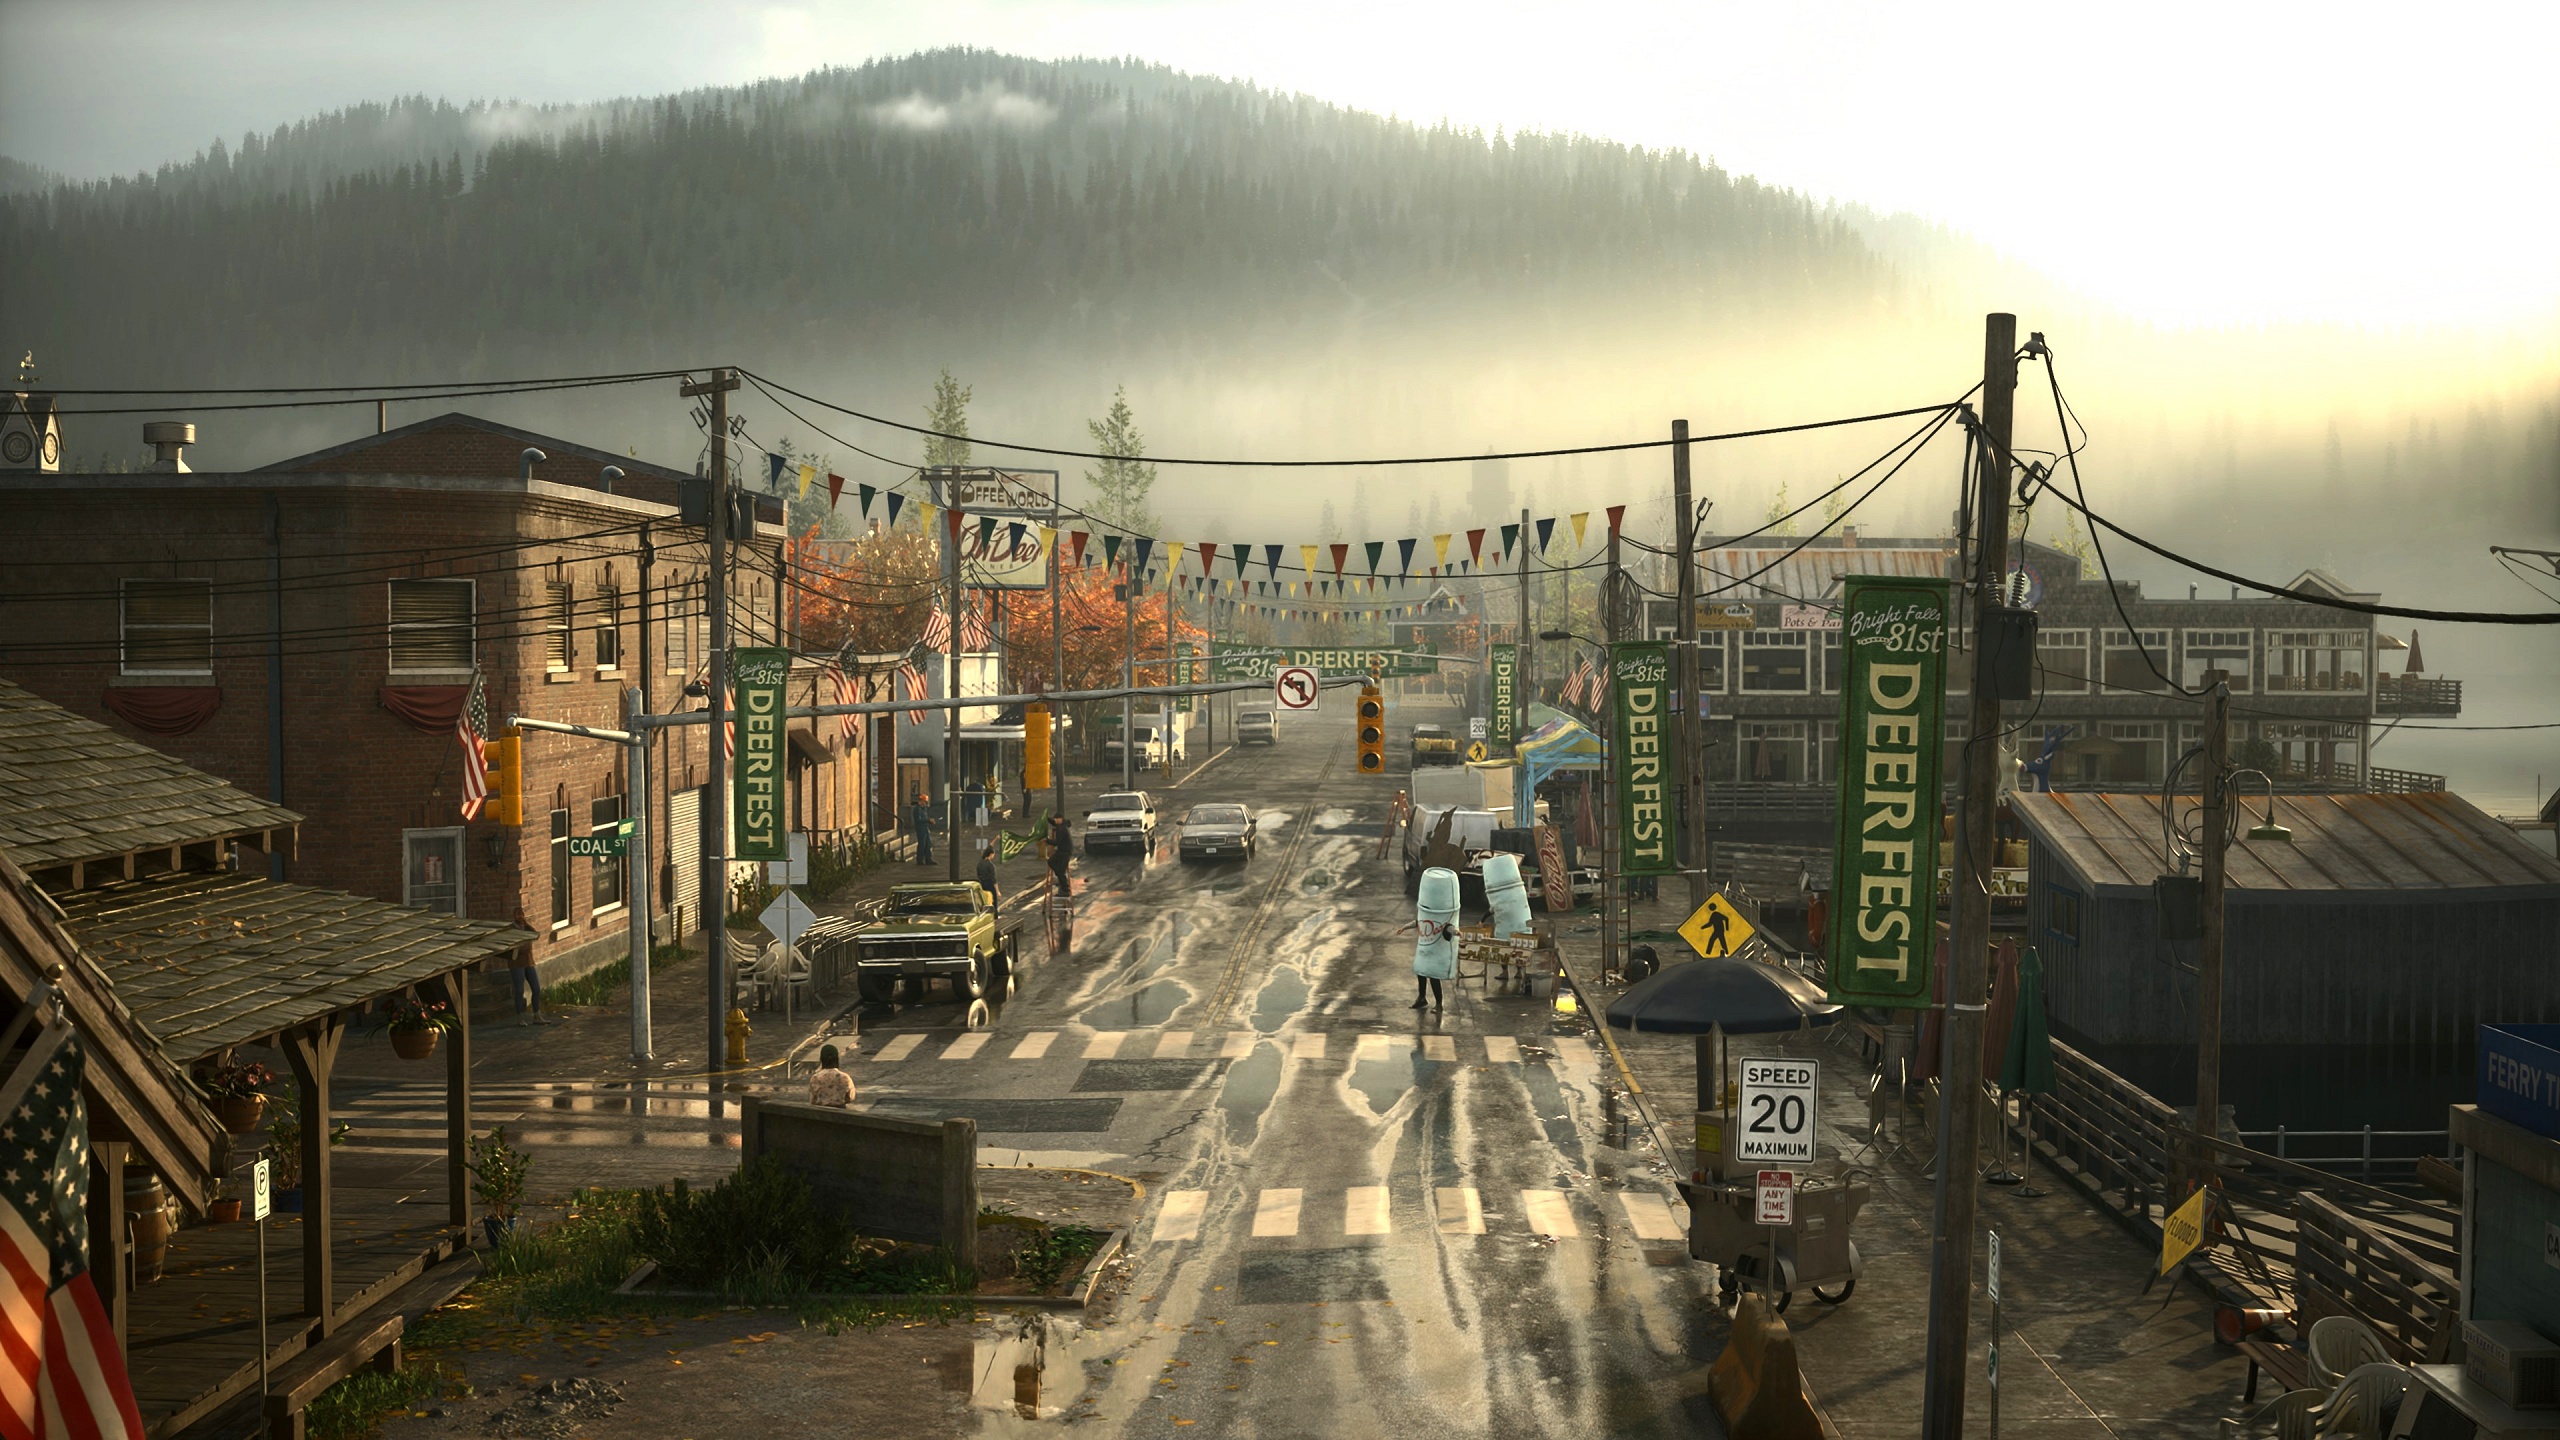 The Top 10 Xbox 360 Games of All Time #5 Alan Wake – Play Legit